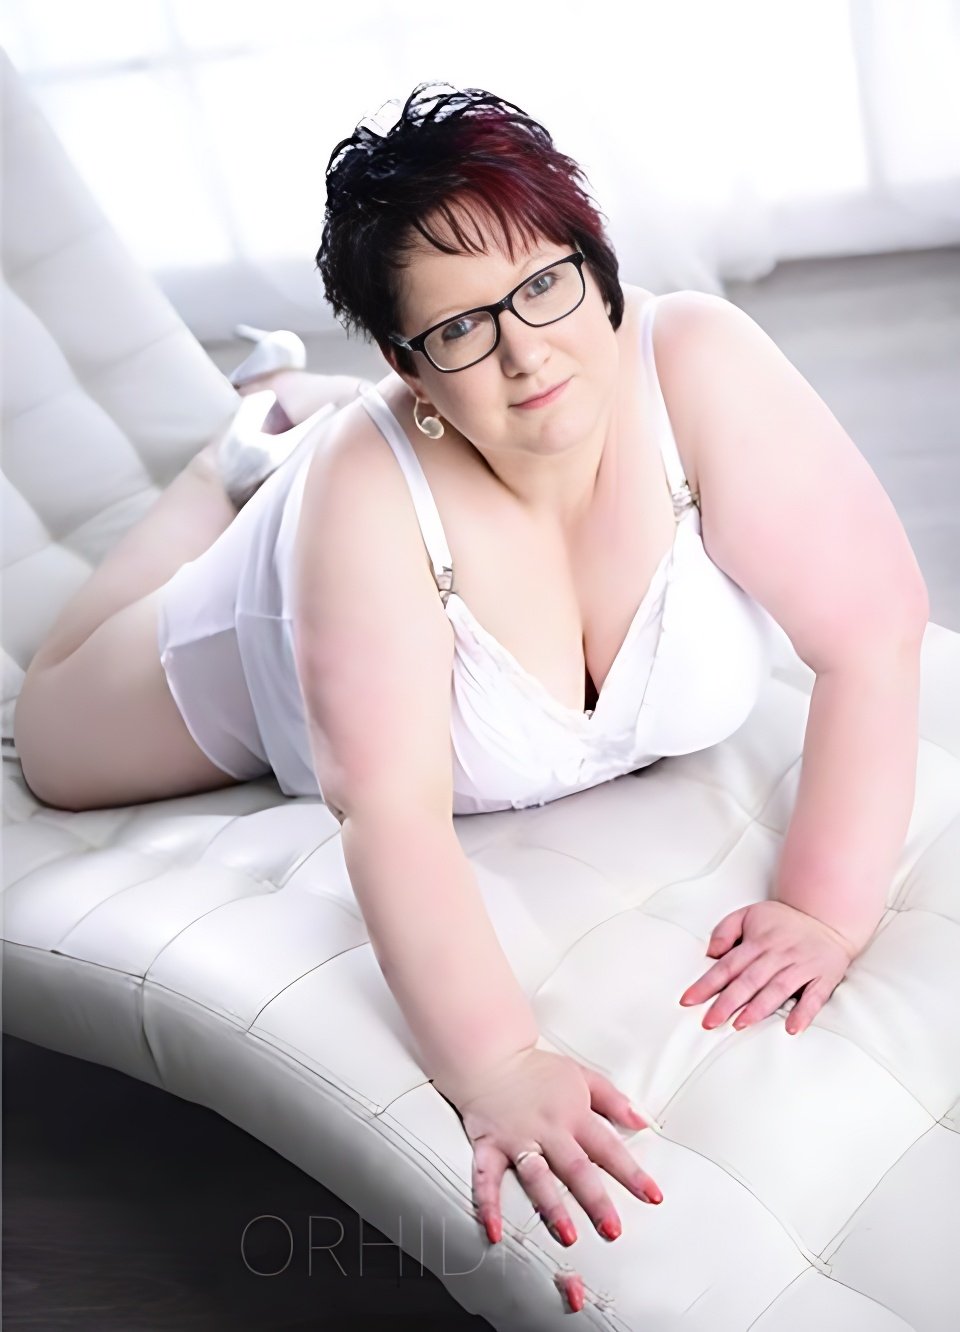 Bester X-CARREE in Halle (Saale) - model photo Lilly (35) - Plus Size Modell